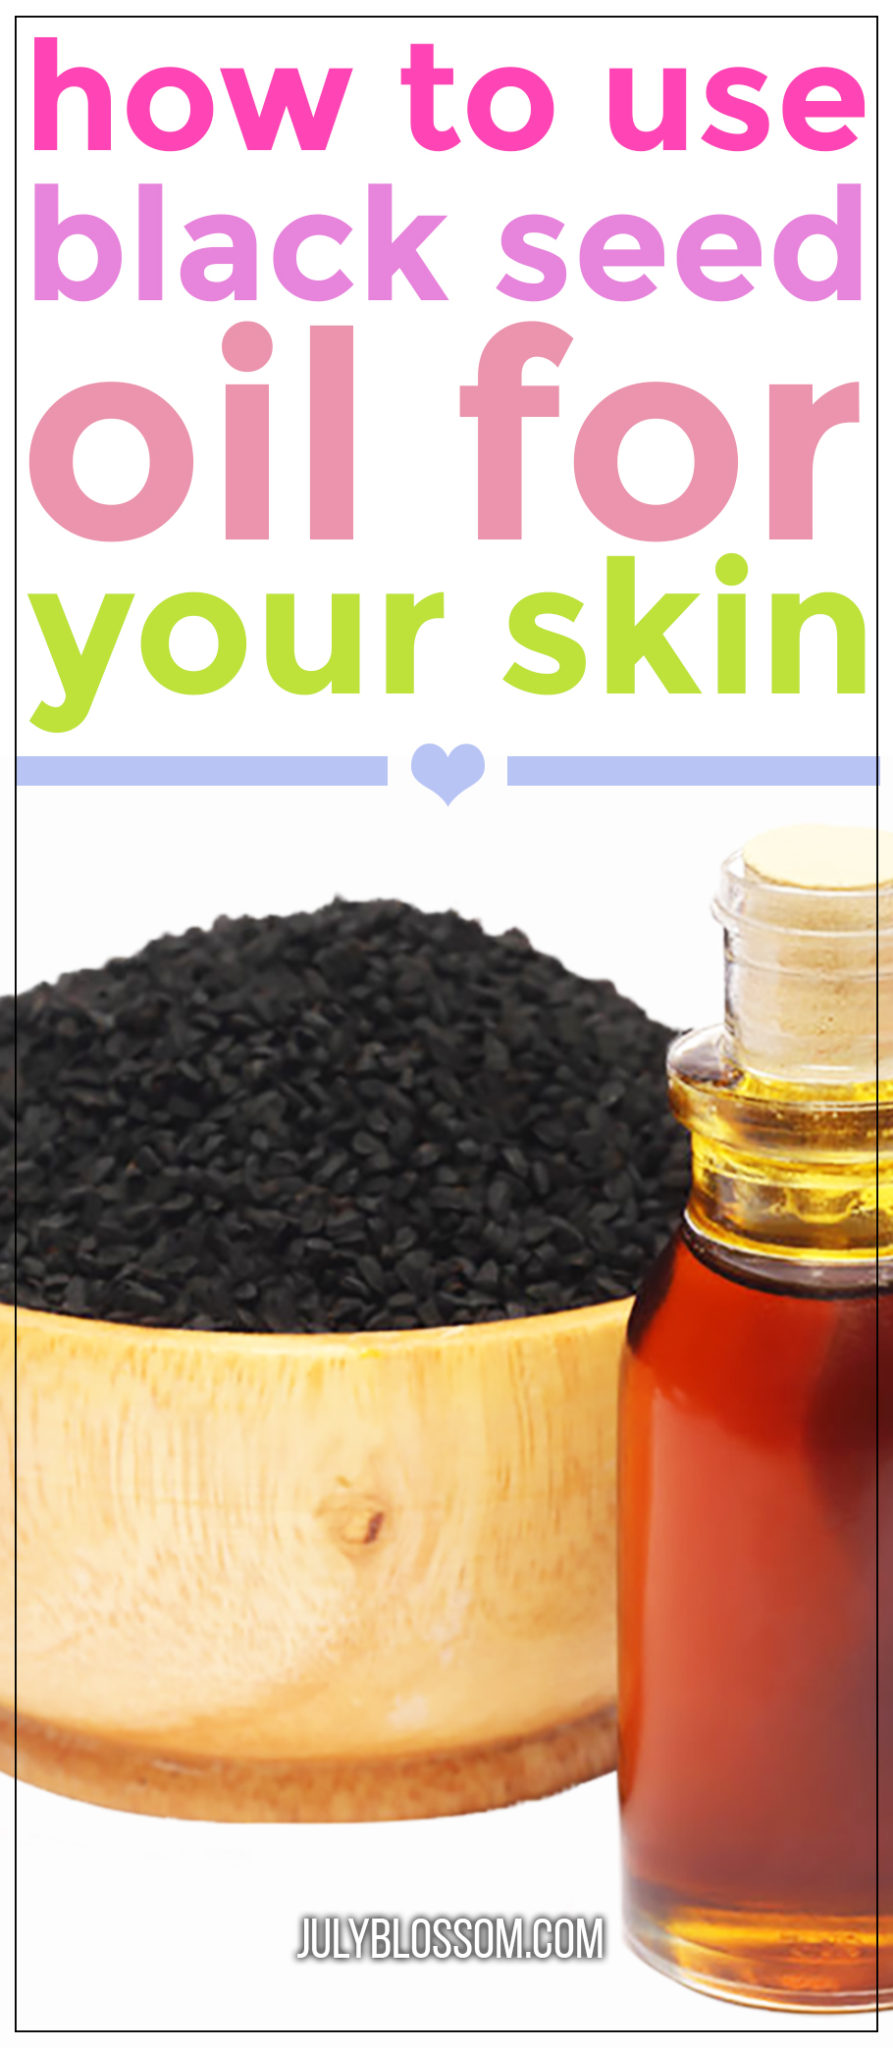 How to Use Black Seed Oil for Skin – 5 Beauty Recipes - ♡ July Blossom